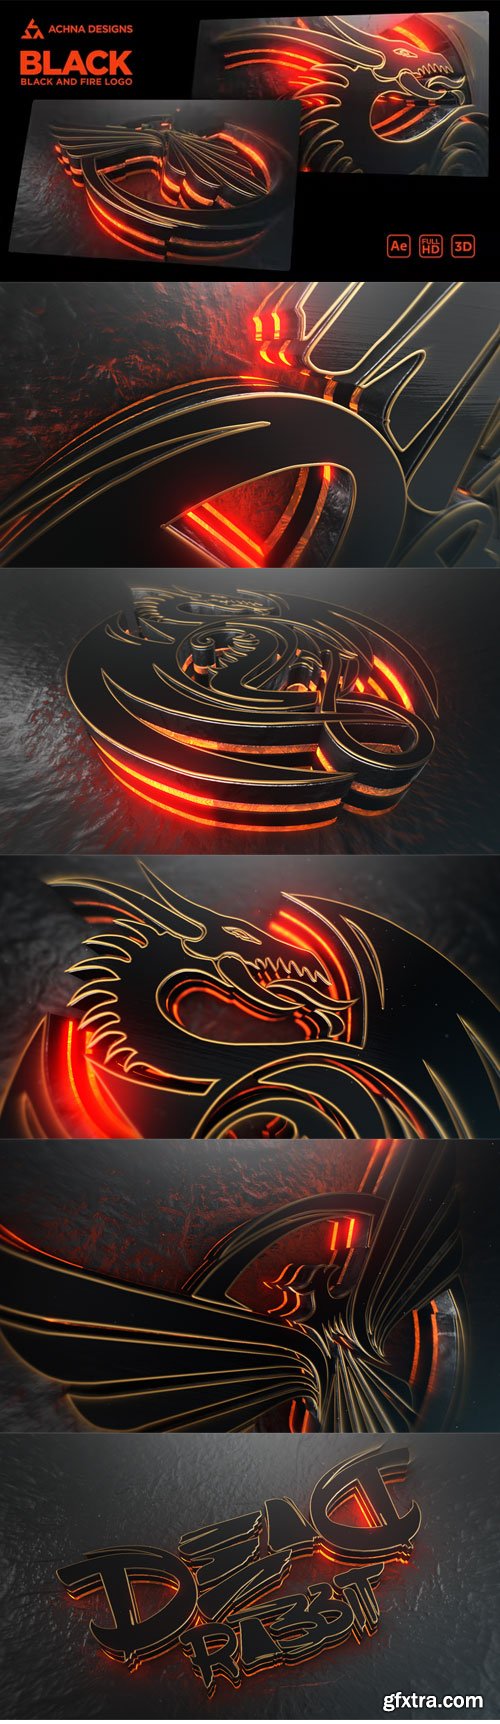 Videohive - Black Epic And Fire Logo - 43743765